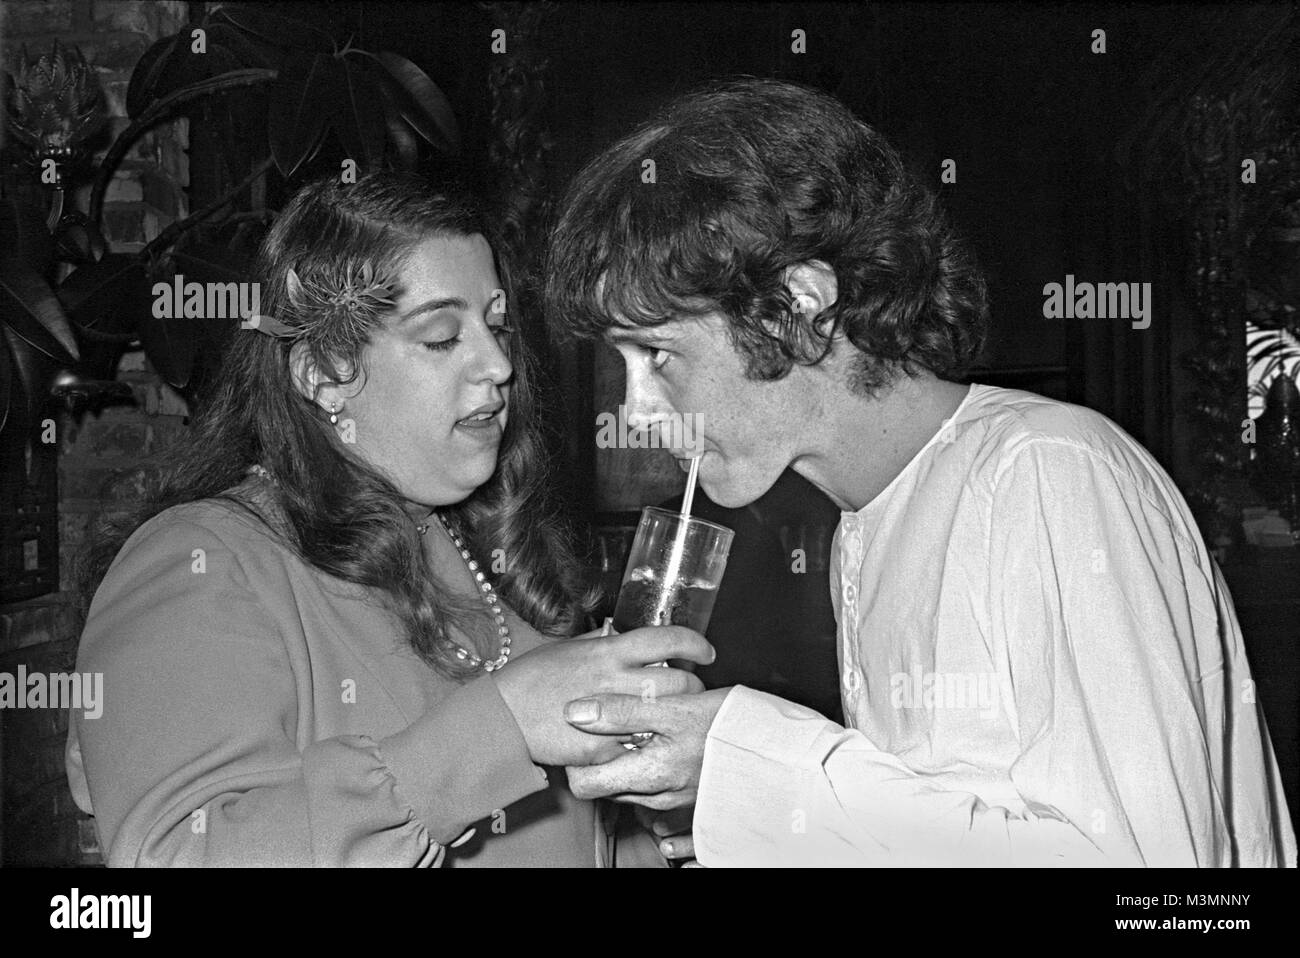 Donovan share a drink with party hostess Mama Cass Elliot at 'The Factory' in Hollywood. September 1969. 'This was taken in Los Angeles in 1969 for the launch of my album Barabajagal. I’d not long come back from India, seeing the Maharishi with the Beatles, so I was wearing my whites – Indian shirt, pantaloons and sandals'. Donovan Leitch Stock Photo